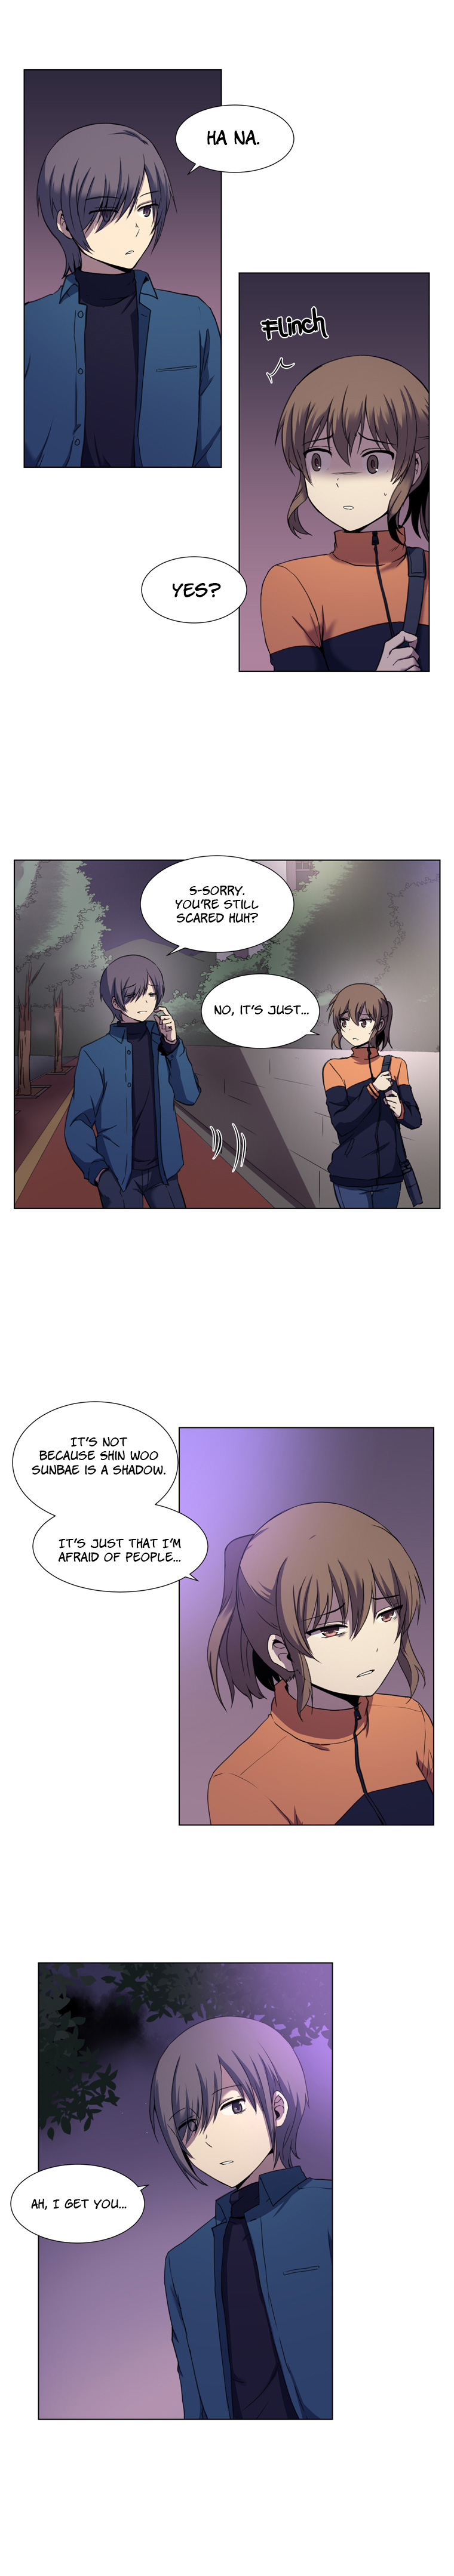 To Kill A Mirror - Page 2